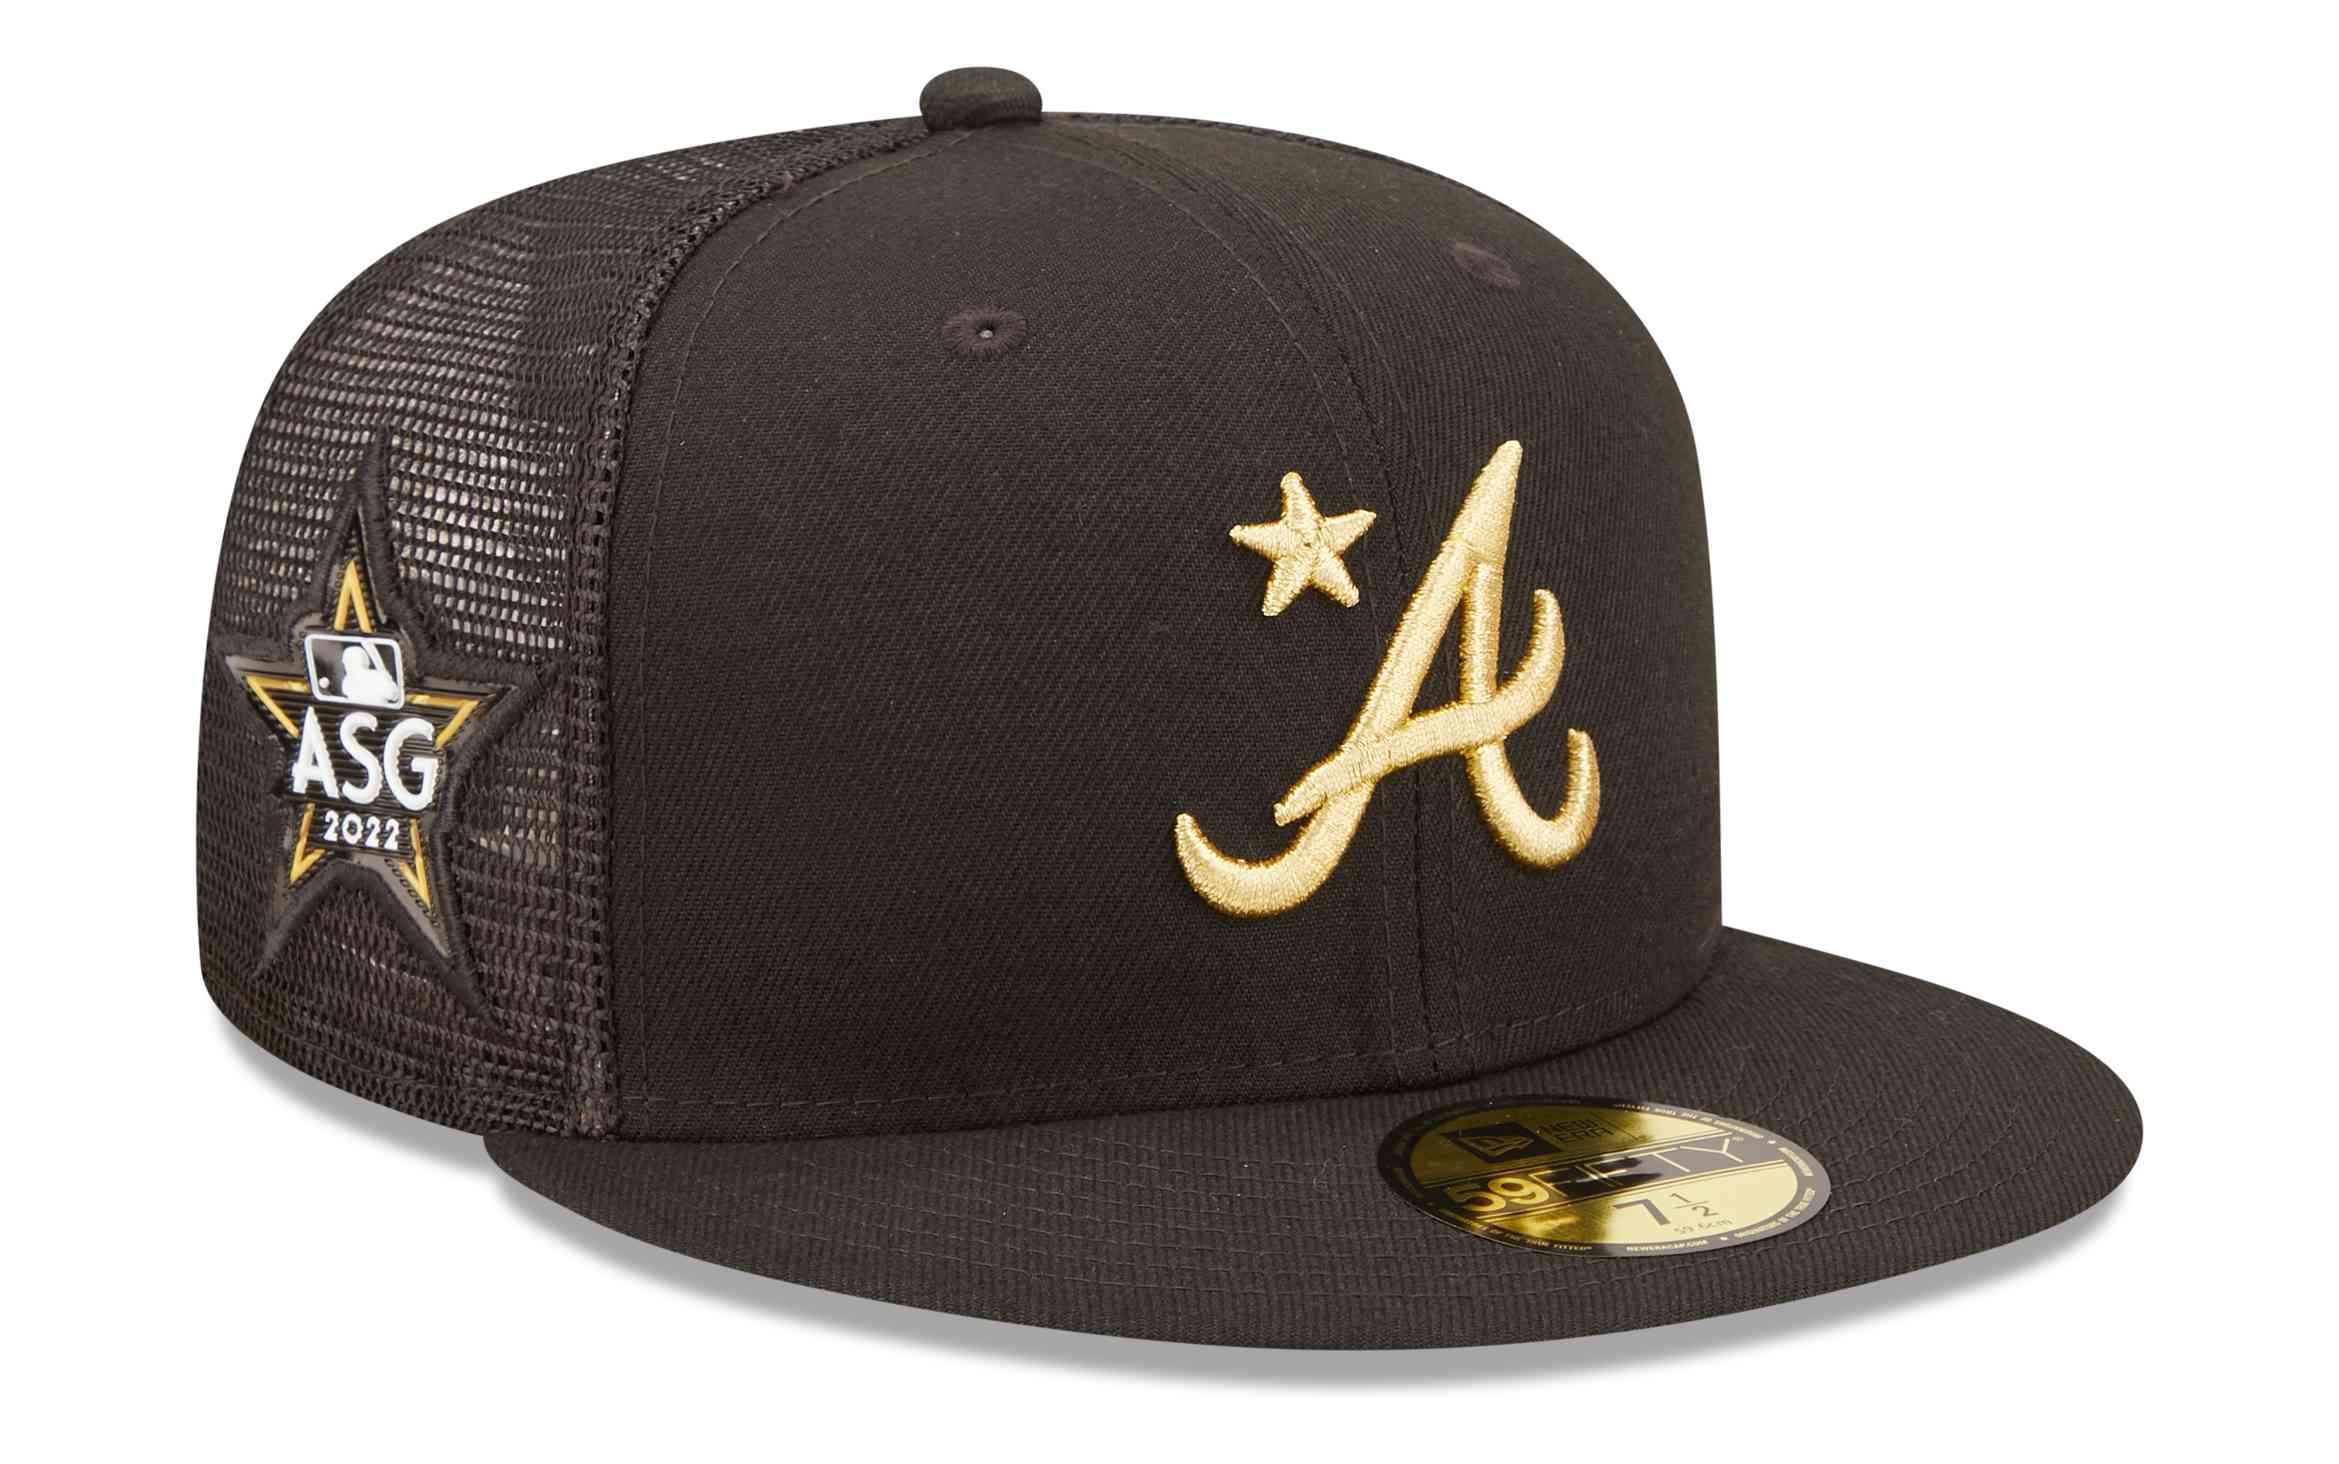 New Era - MLB Atlanta Braves All Star Game Patch 59Fifty Fitted Cap